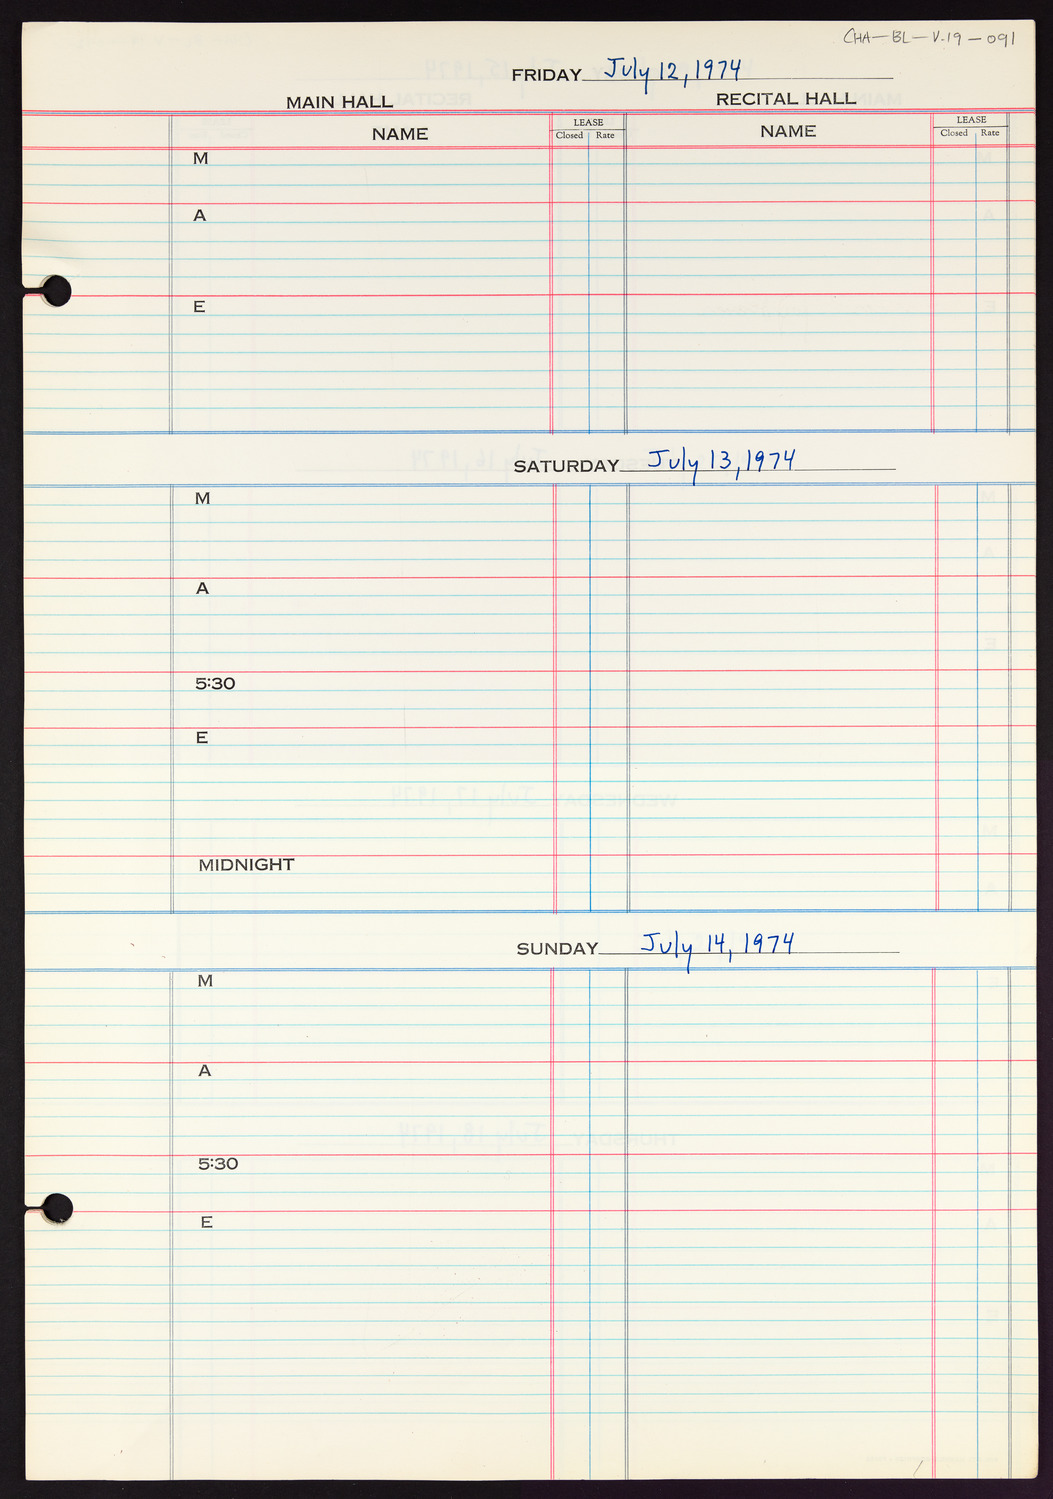 Carnegie Hall Booking Ledger, volume 19, page 91